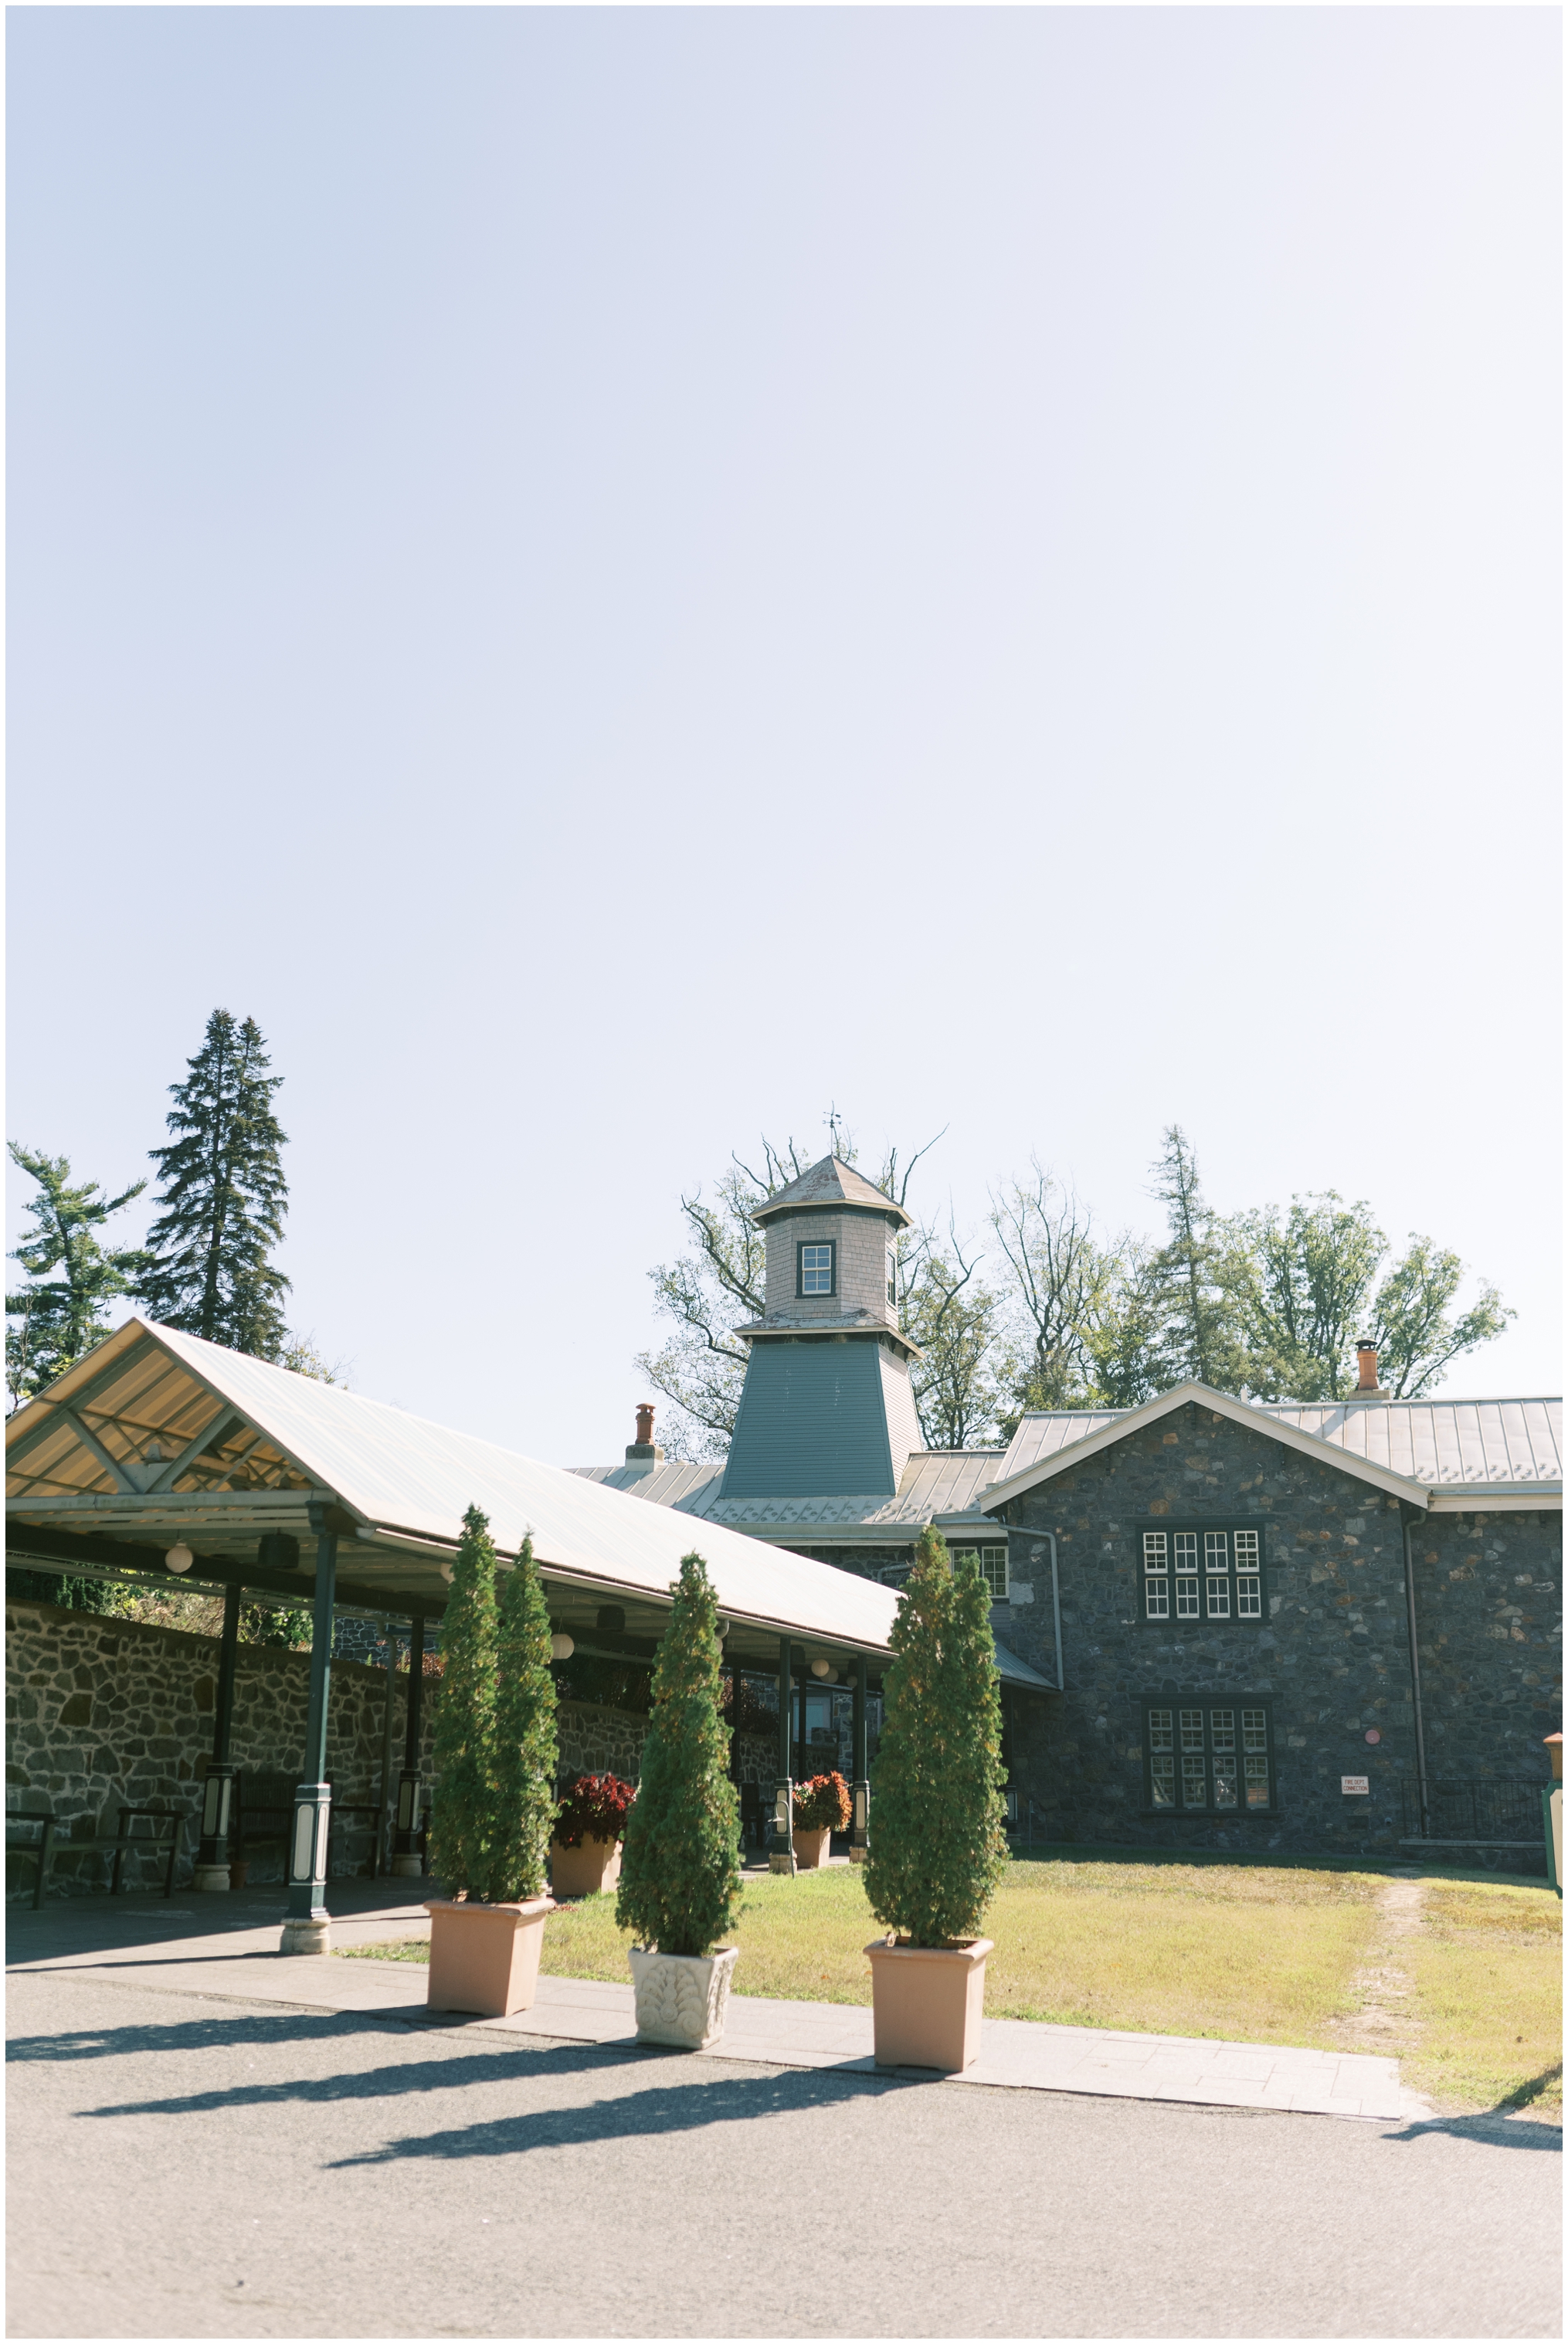 Wedding at The Carriage House at Rockwood Park